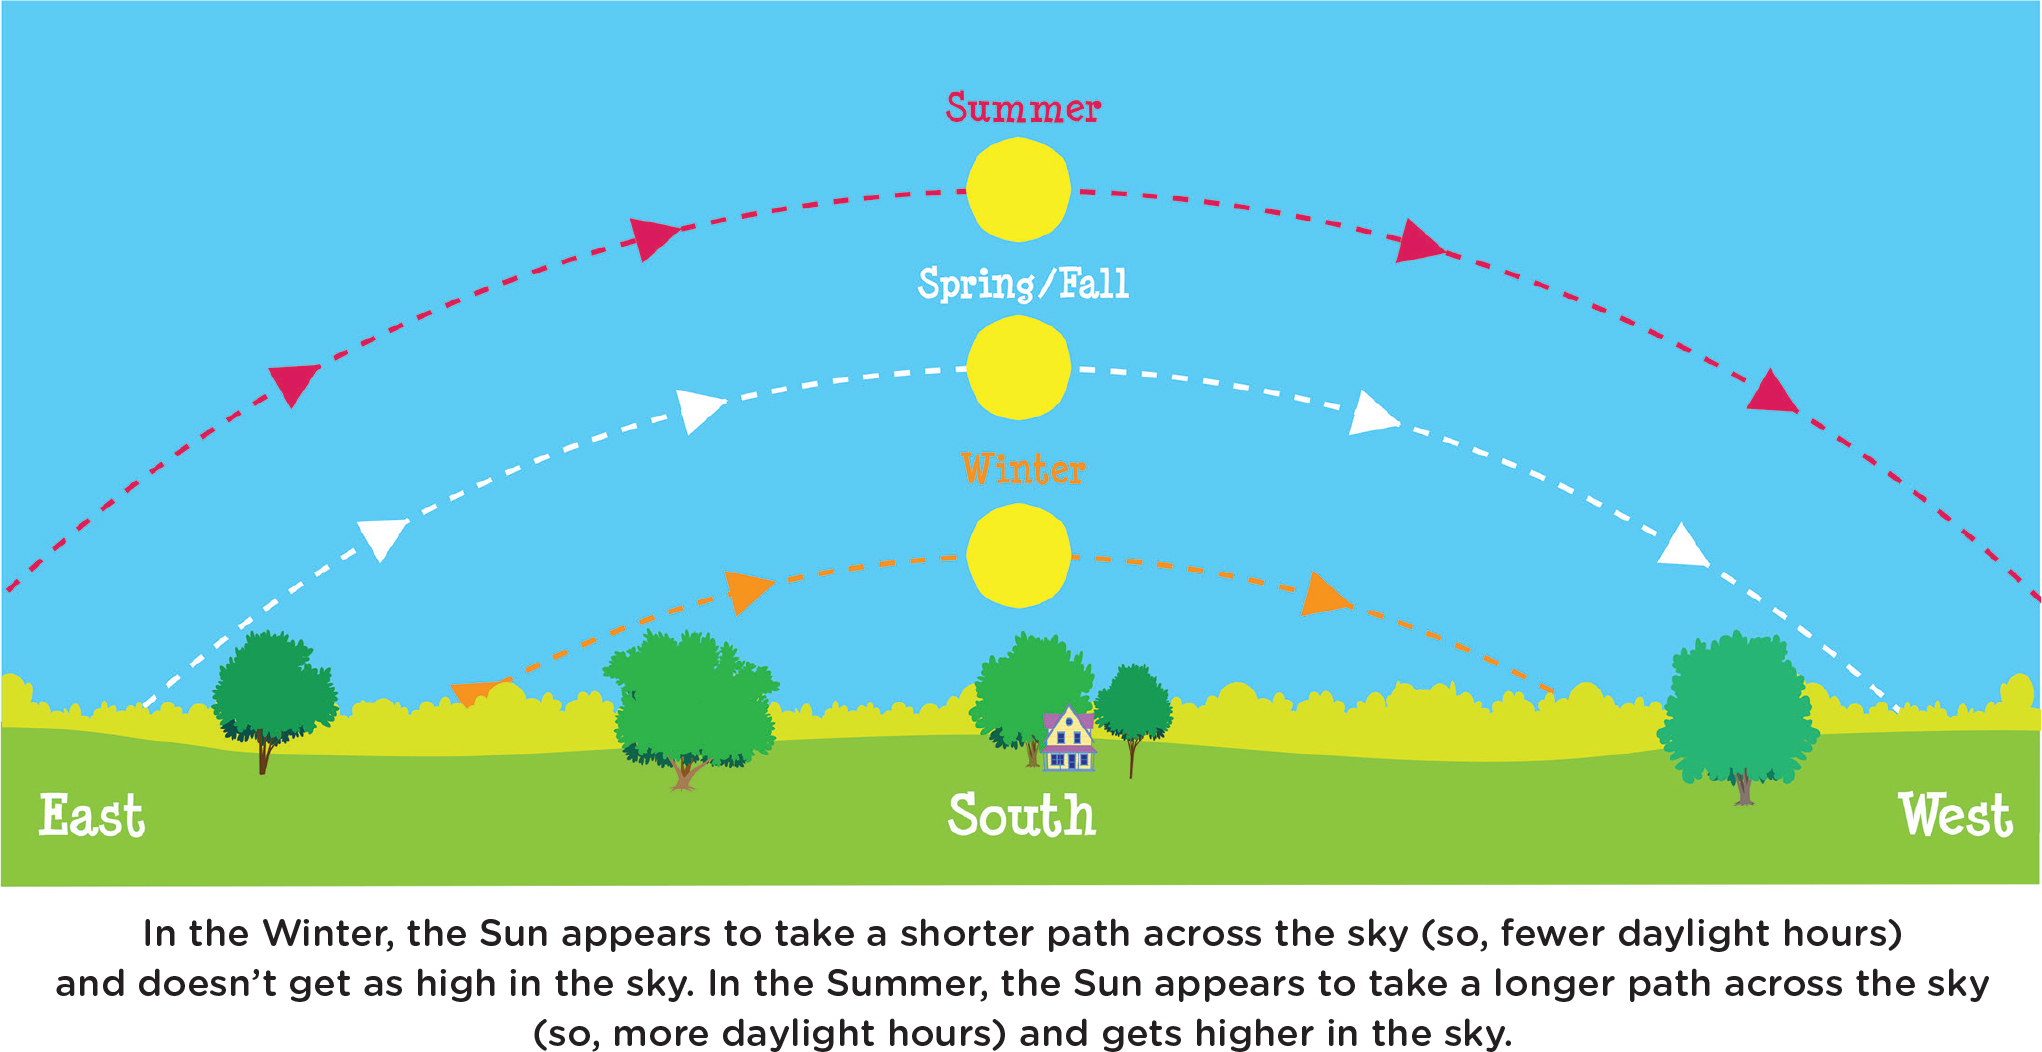 In the Winter, the Sun appears to take a shorter path across the sky (so, fewer daylight hours)  and doesn’t get as high in the sky. In the Summer, the Sun appears to take a longer path across the sky  (so, more daylight hours) and gets higher in the sky.